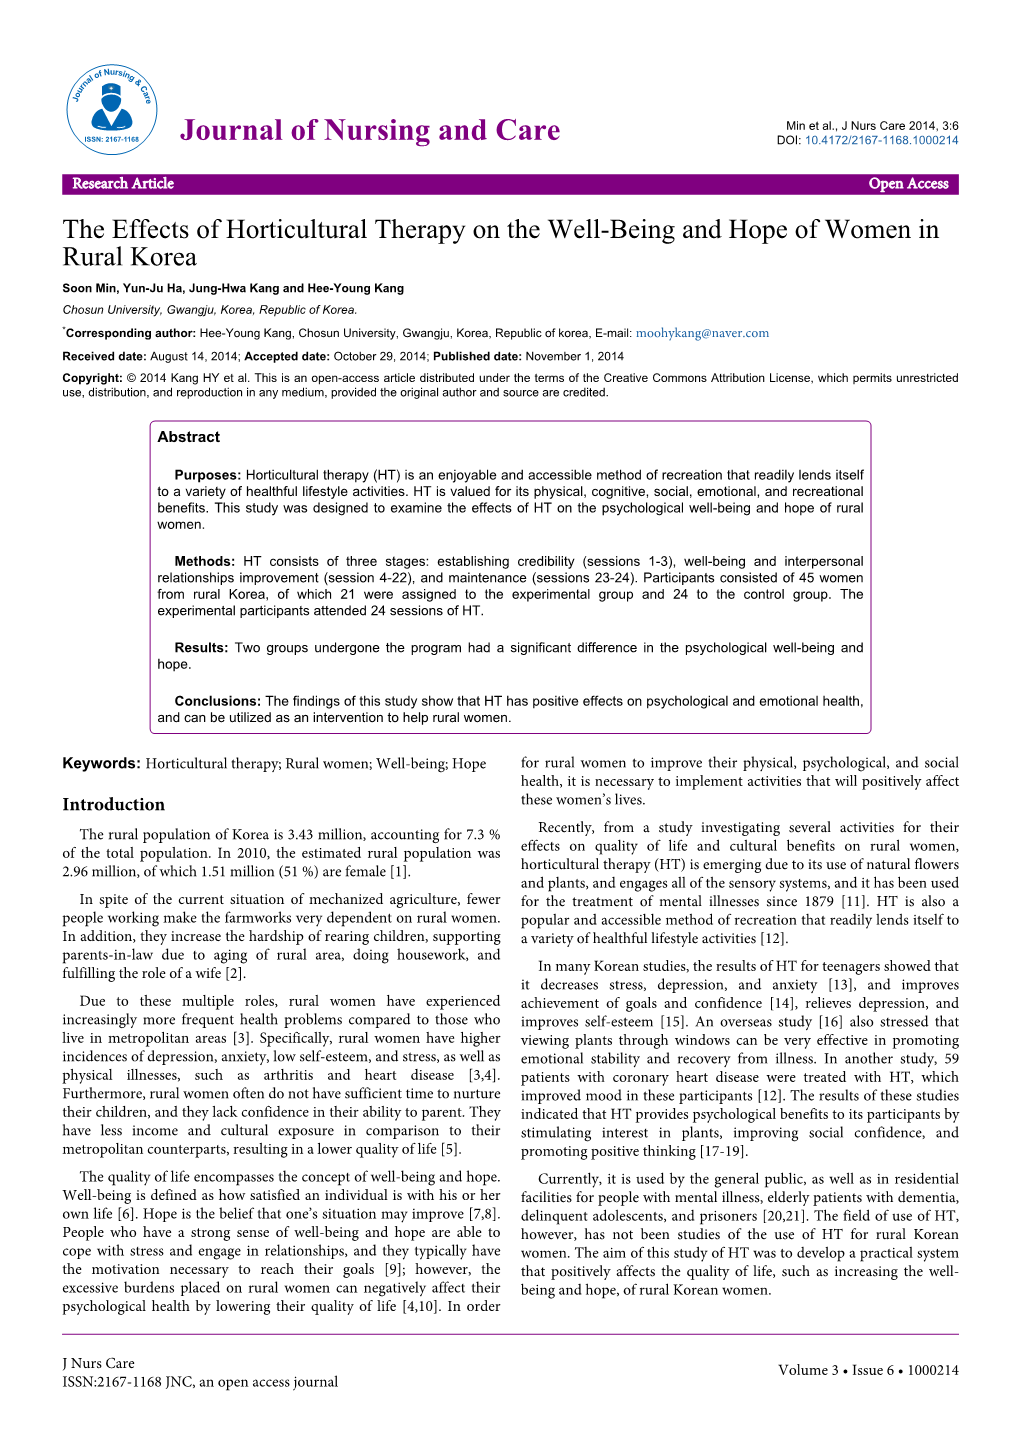 The Effects of Horticultural Therapy on the Well-Being and Hope Of